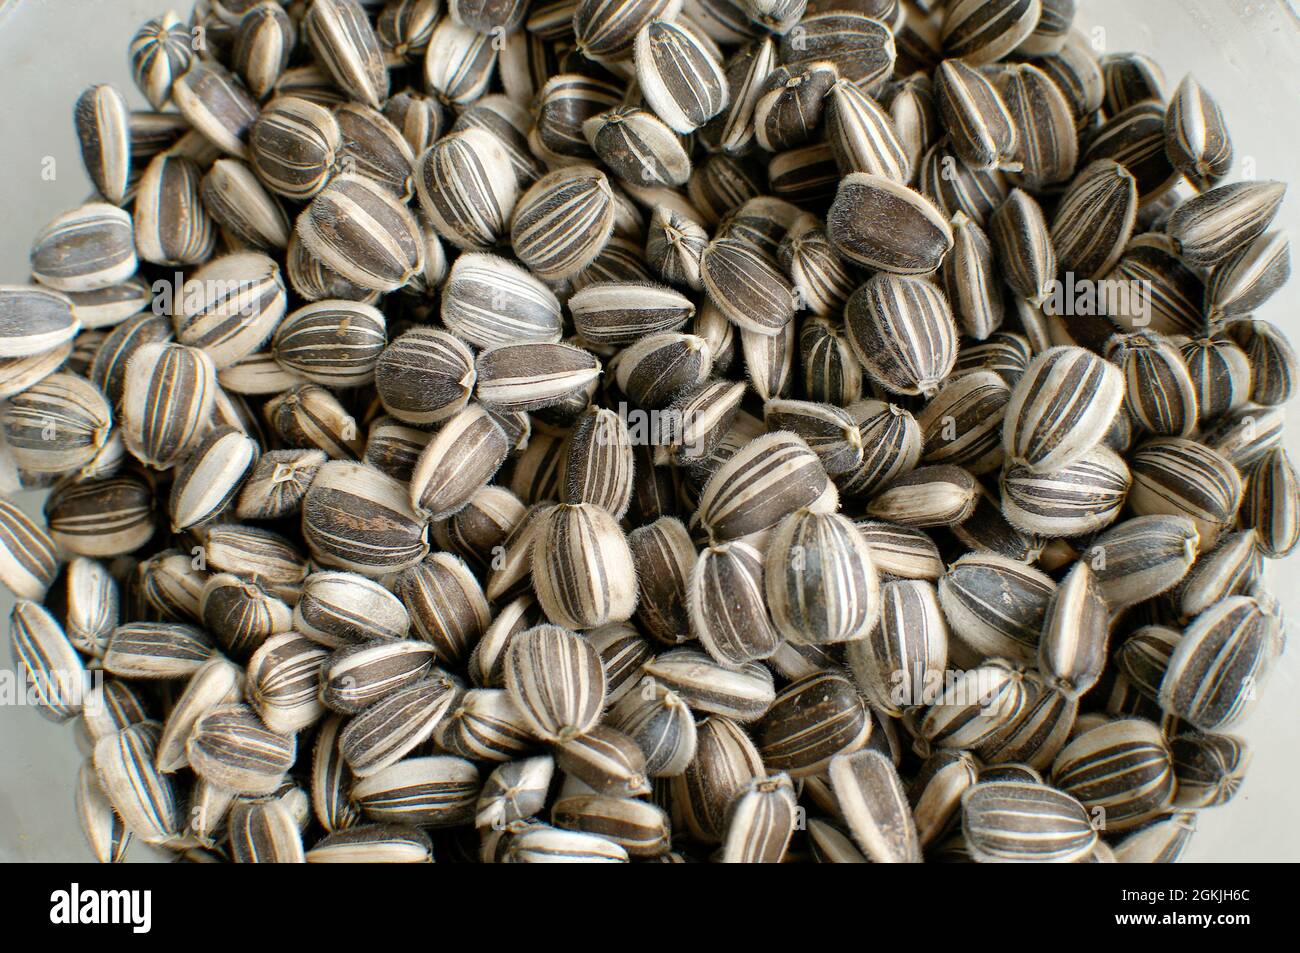 Raw Striped Sunflower Seeds (Helianthus annuus) in the Shell. Stock Photo